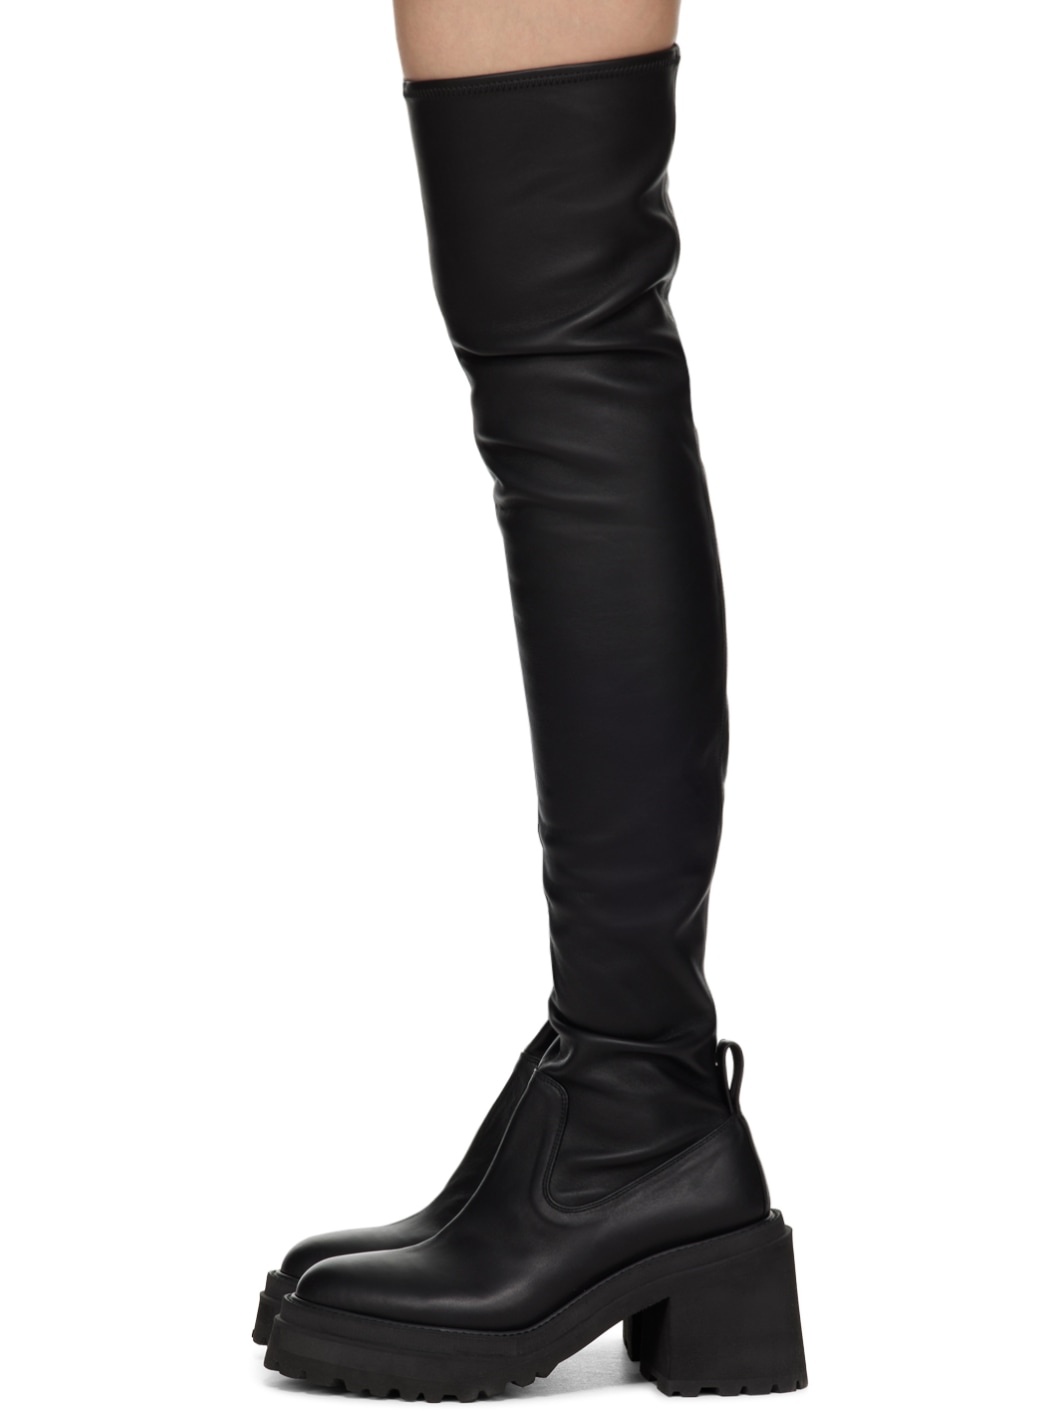 Black Leather Tall Boots - 3